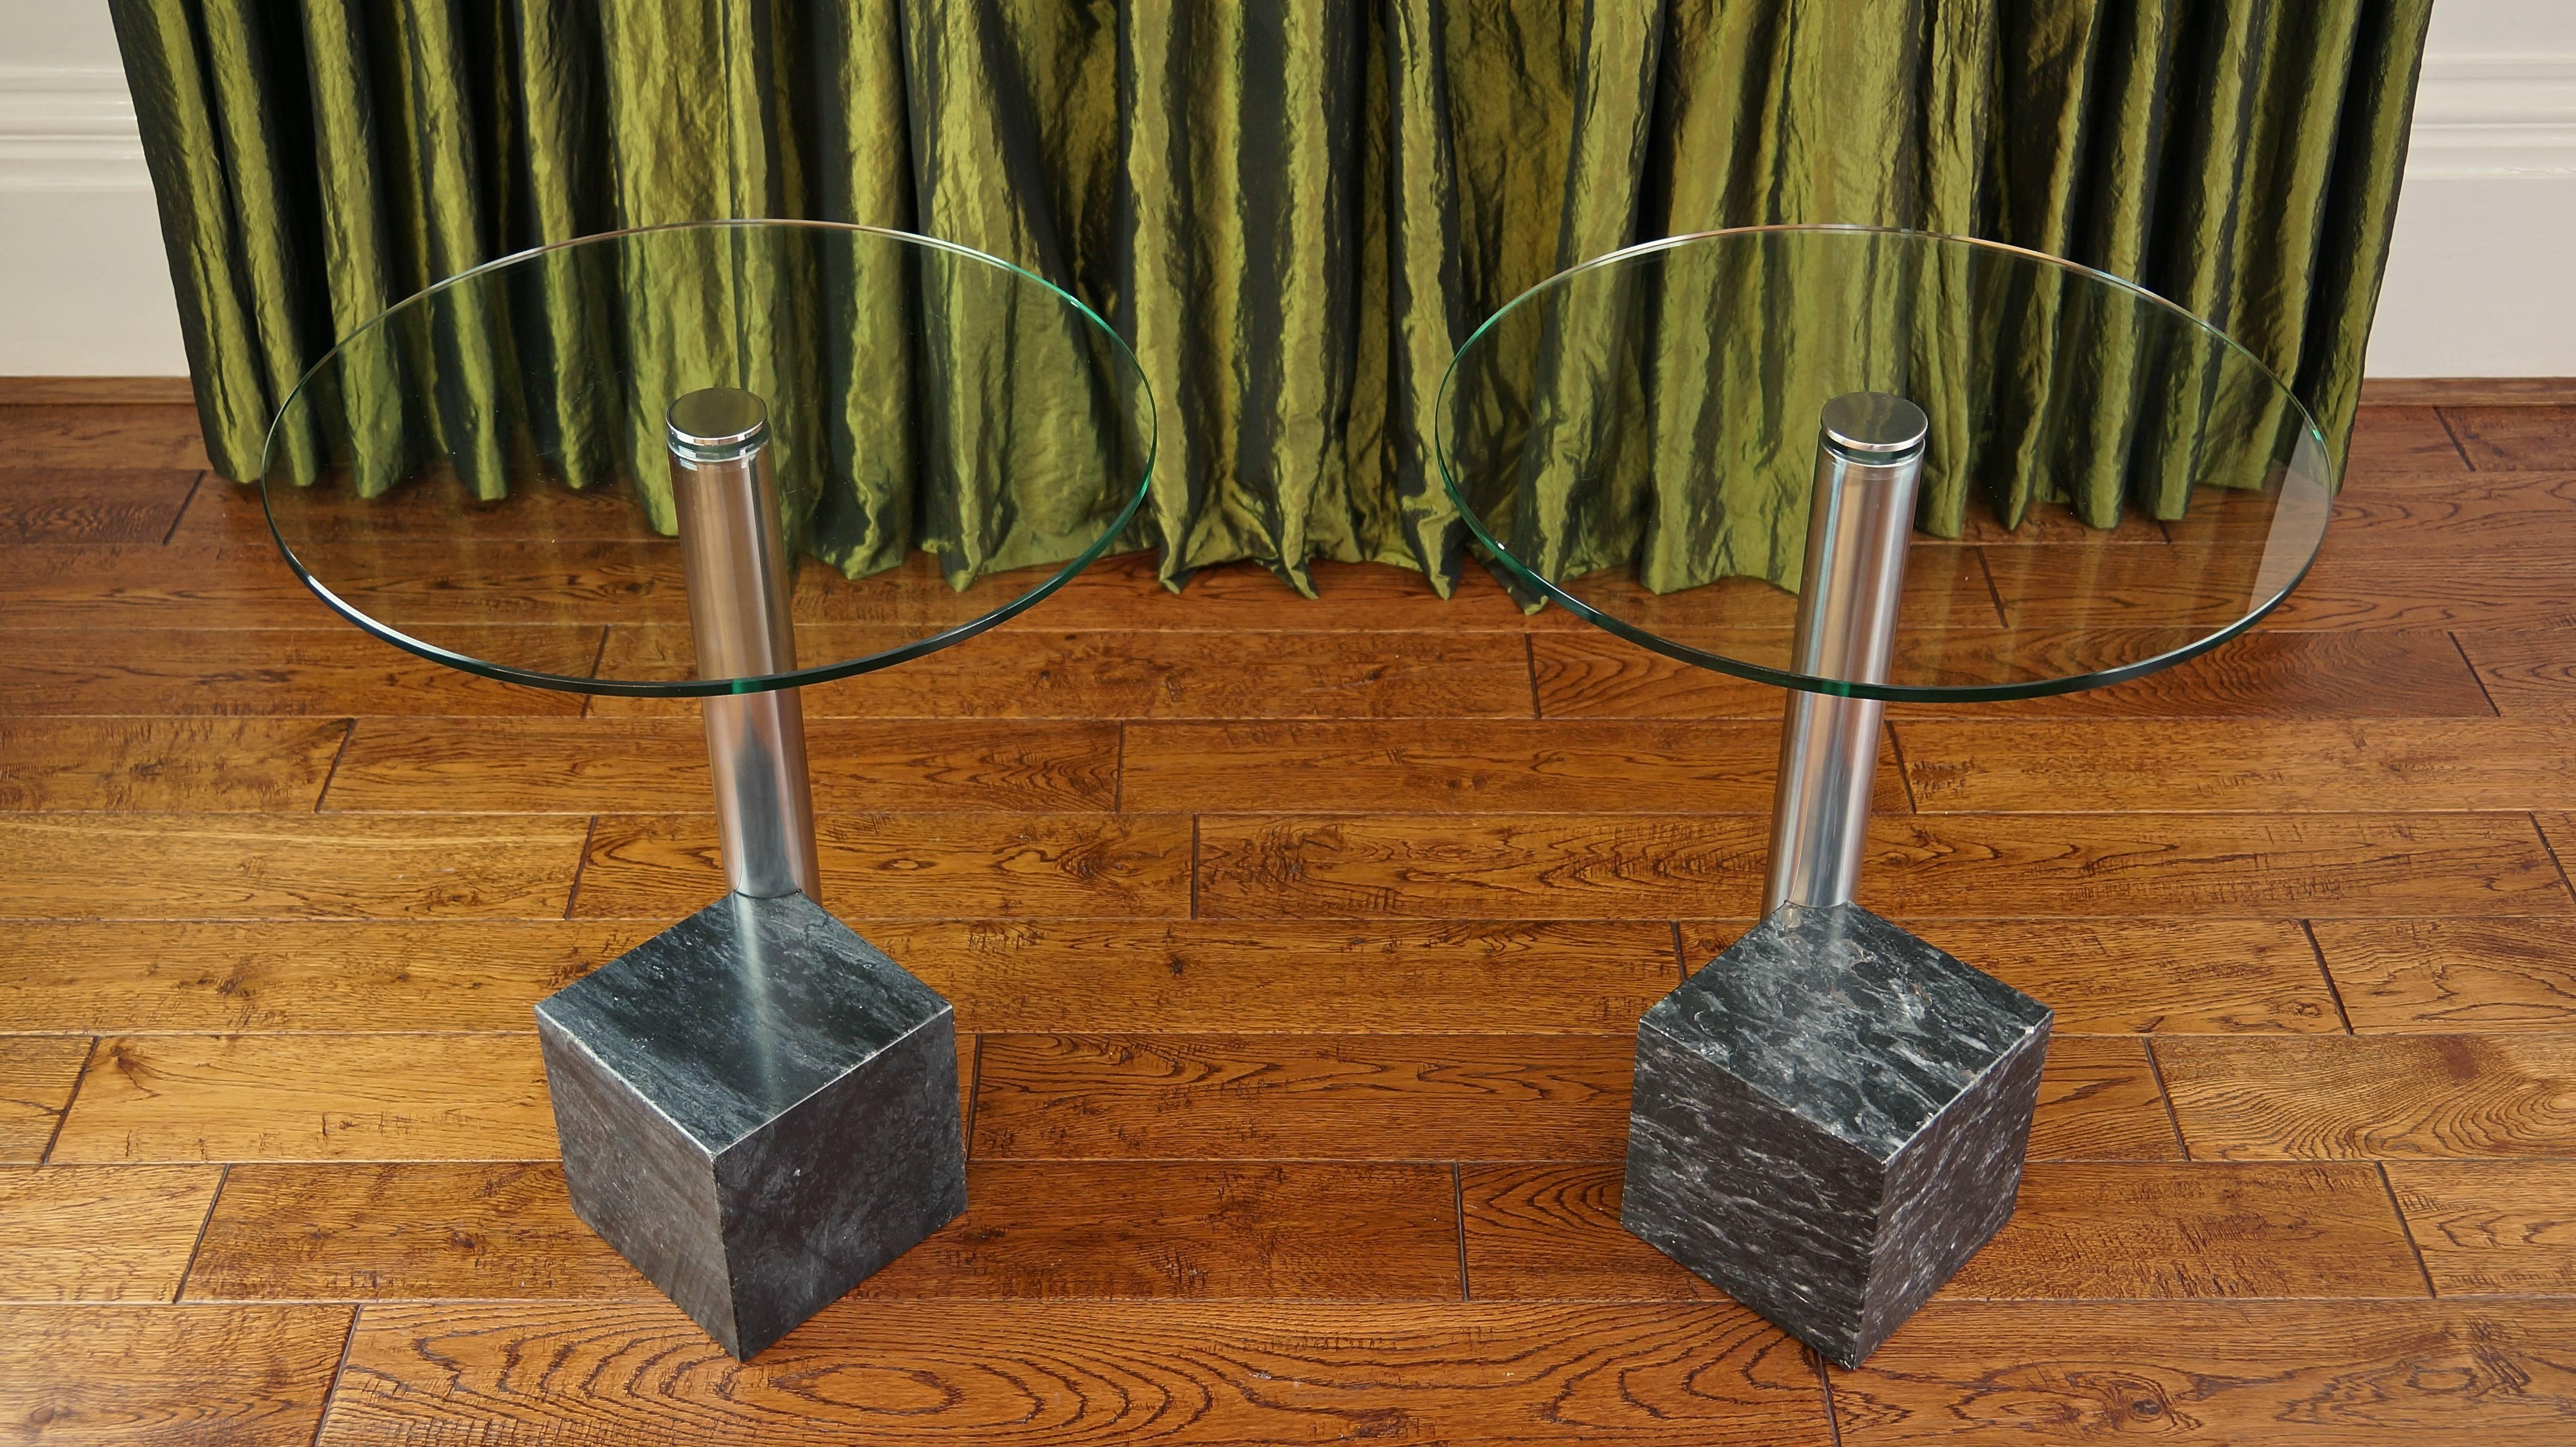 Pair of Vintage Marble and Glass HK2 Side Tables by Hank Kwint, Metaform 1980s 1